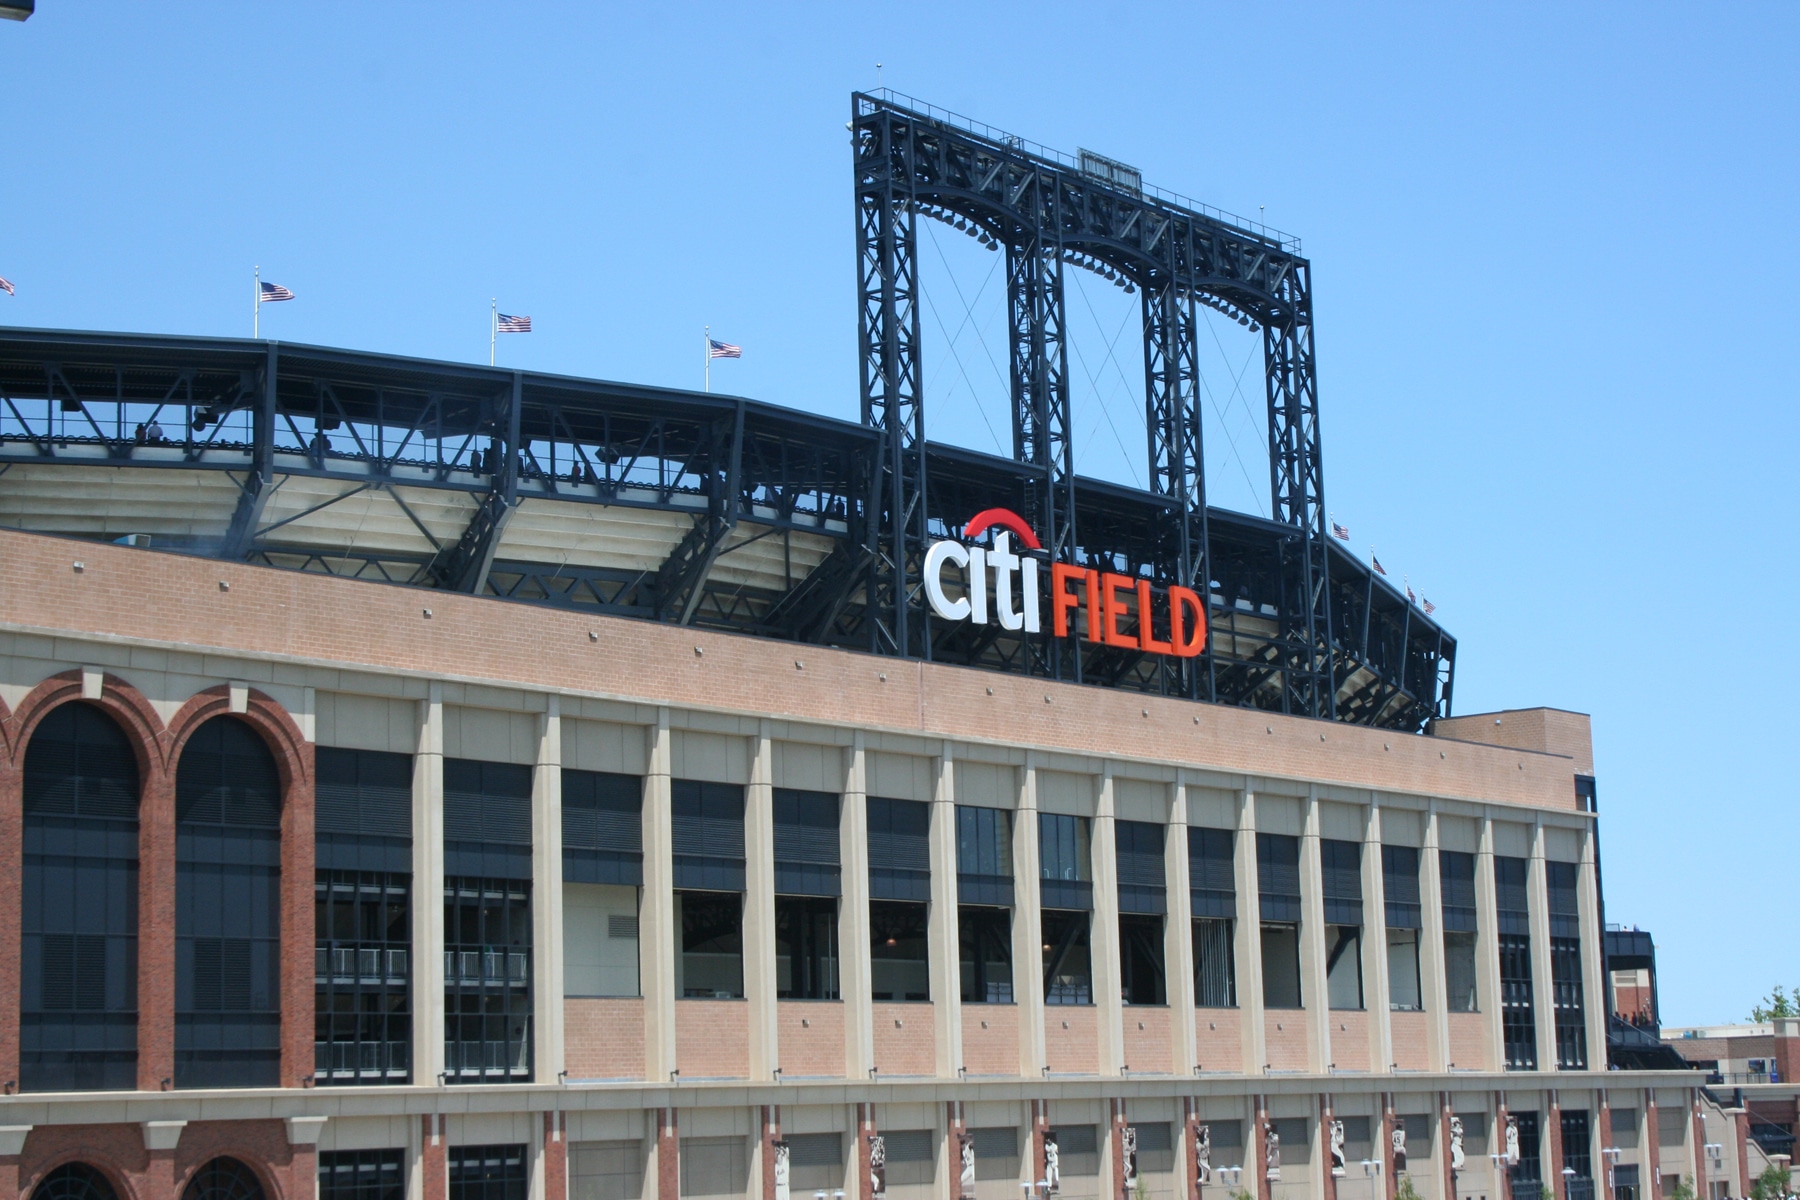 The view of Citi Field as we got off the subway